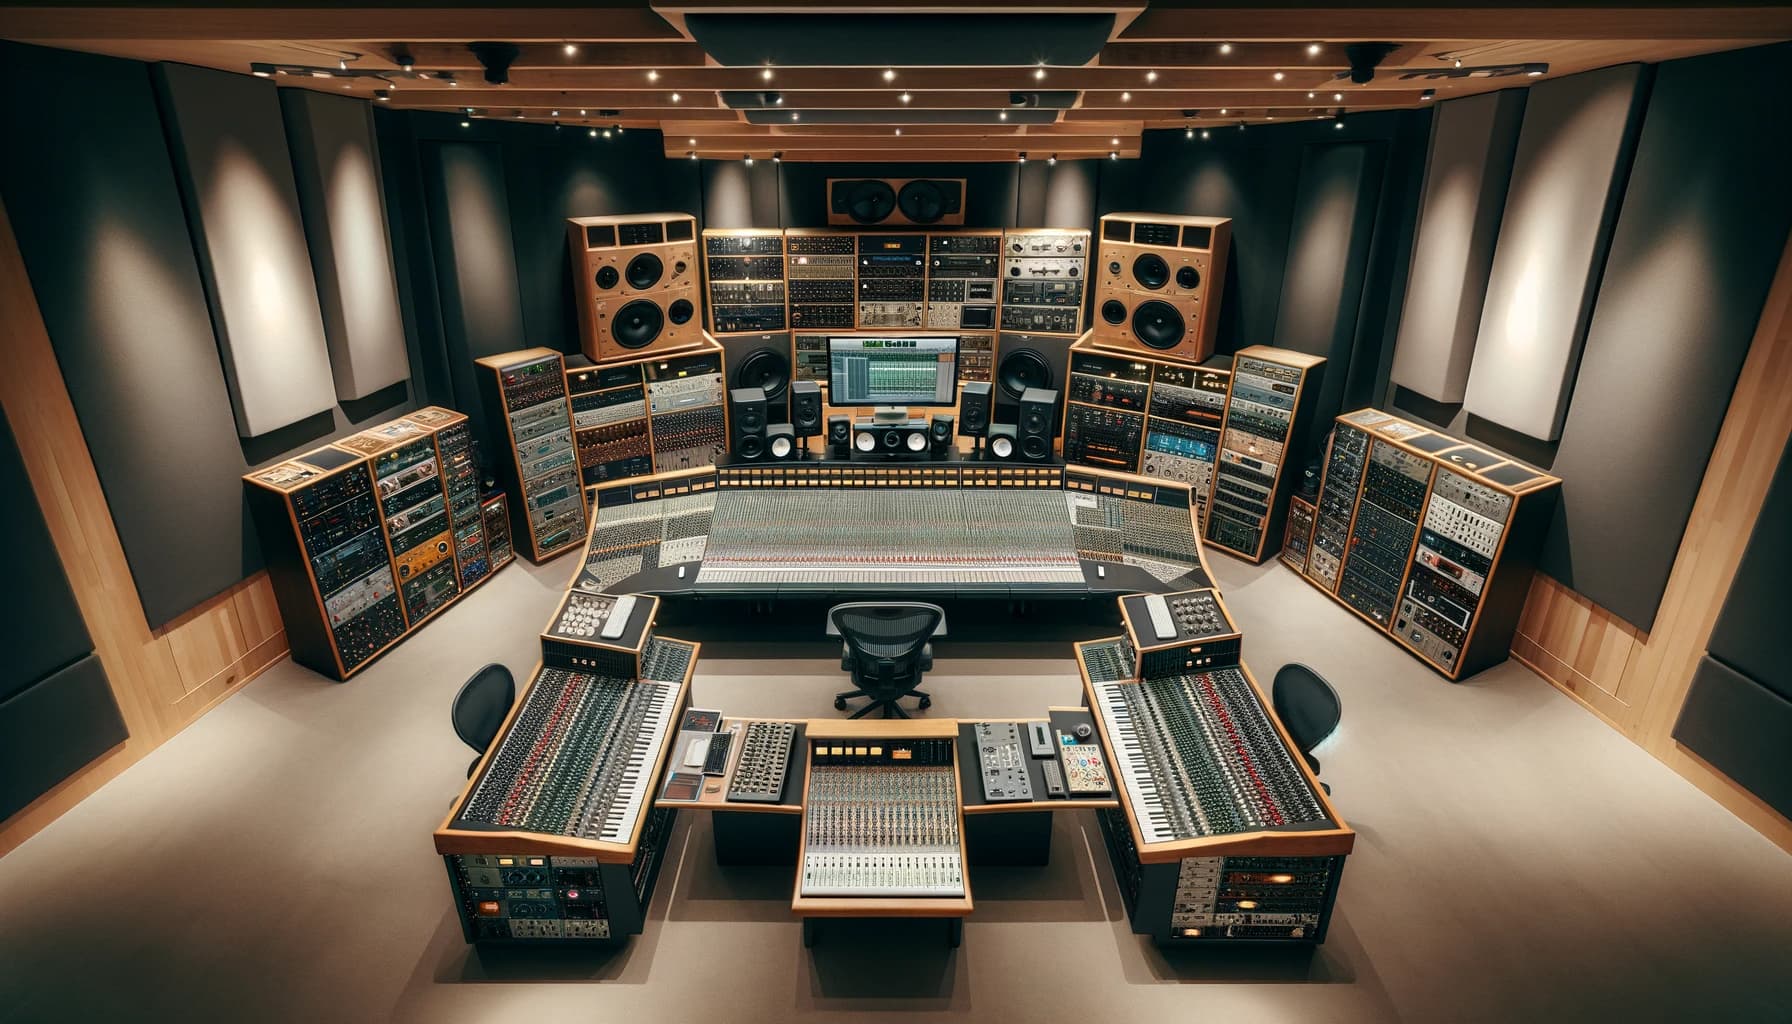 An image showcasing a bird's-eye view of a professional mastering studio, capturing the expansive layout filled with high-end audio equipment.